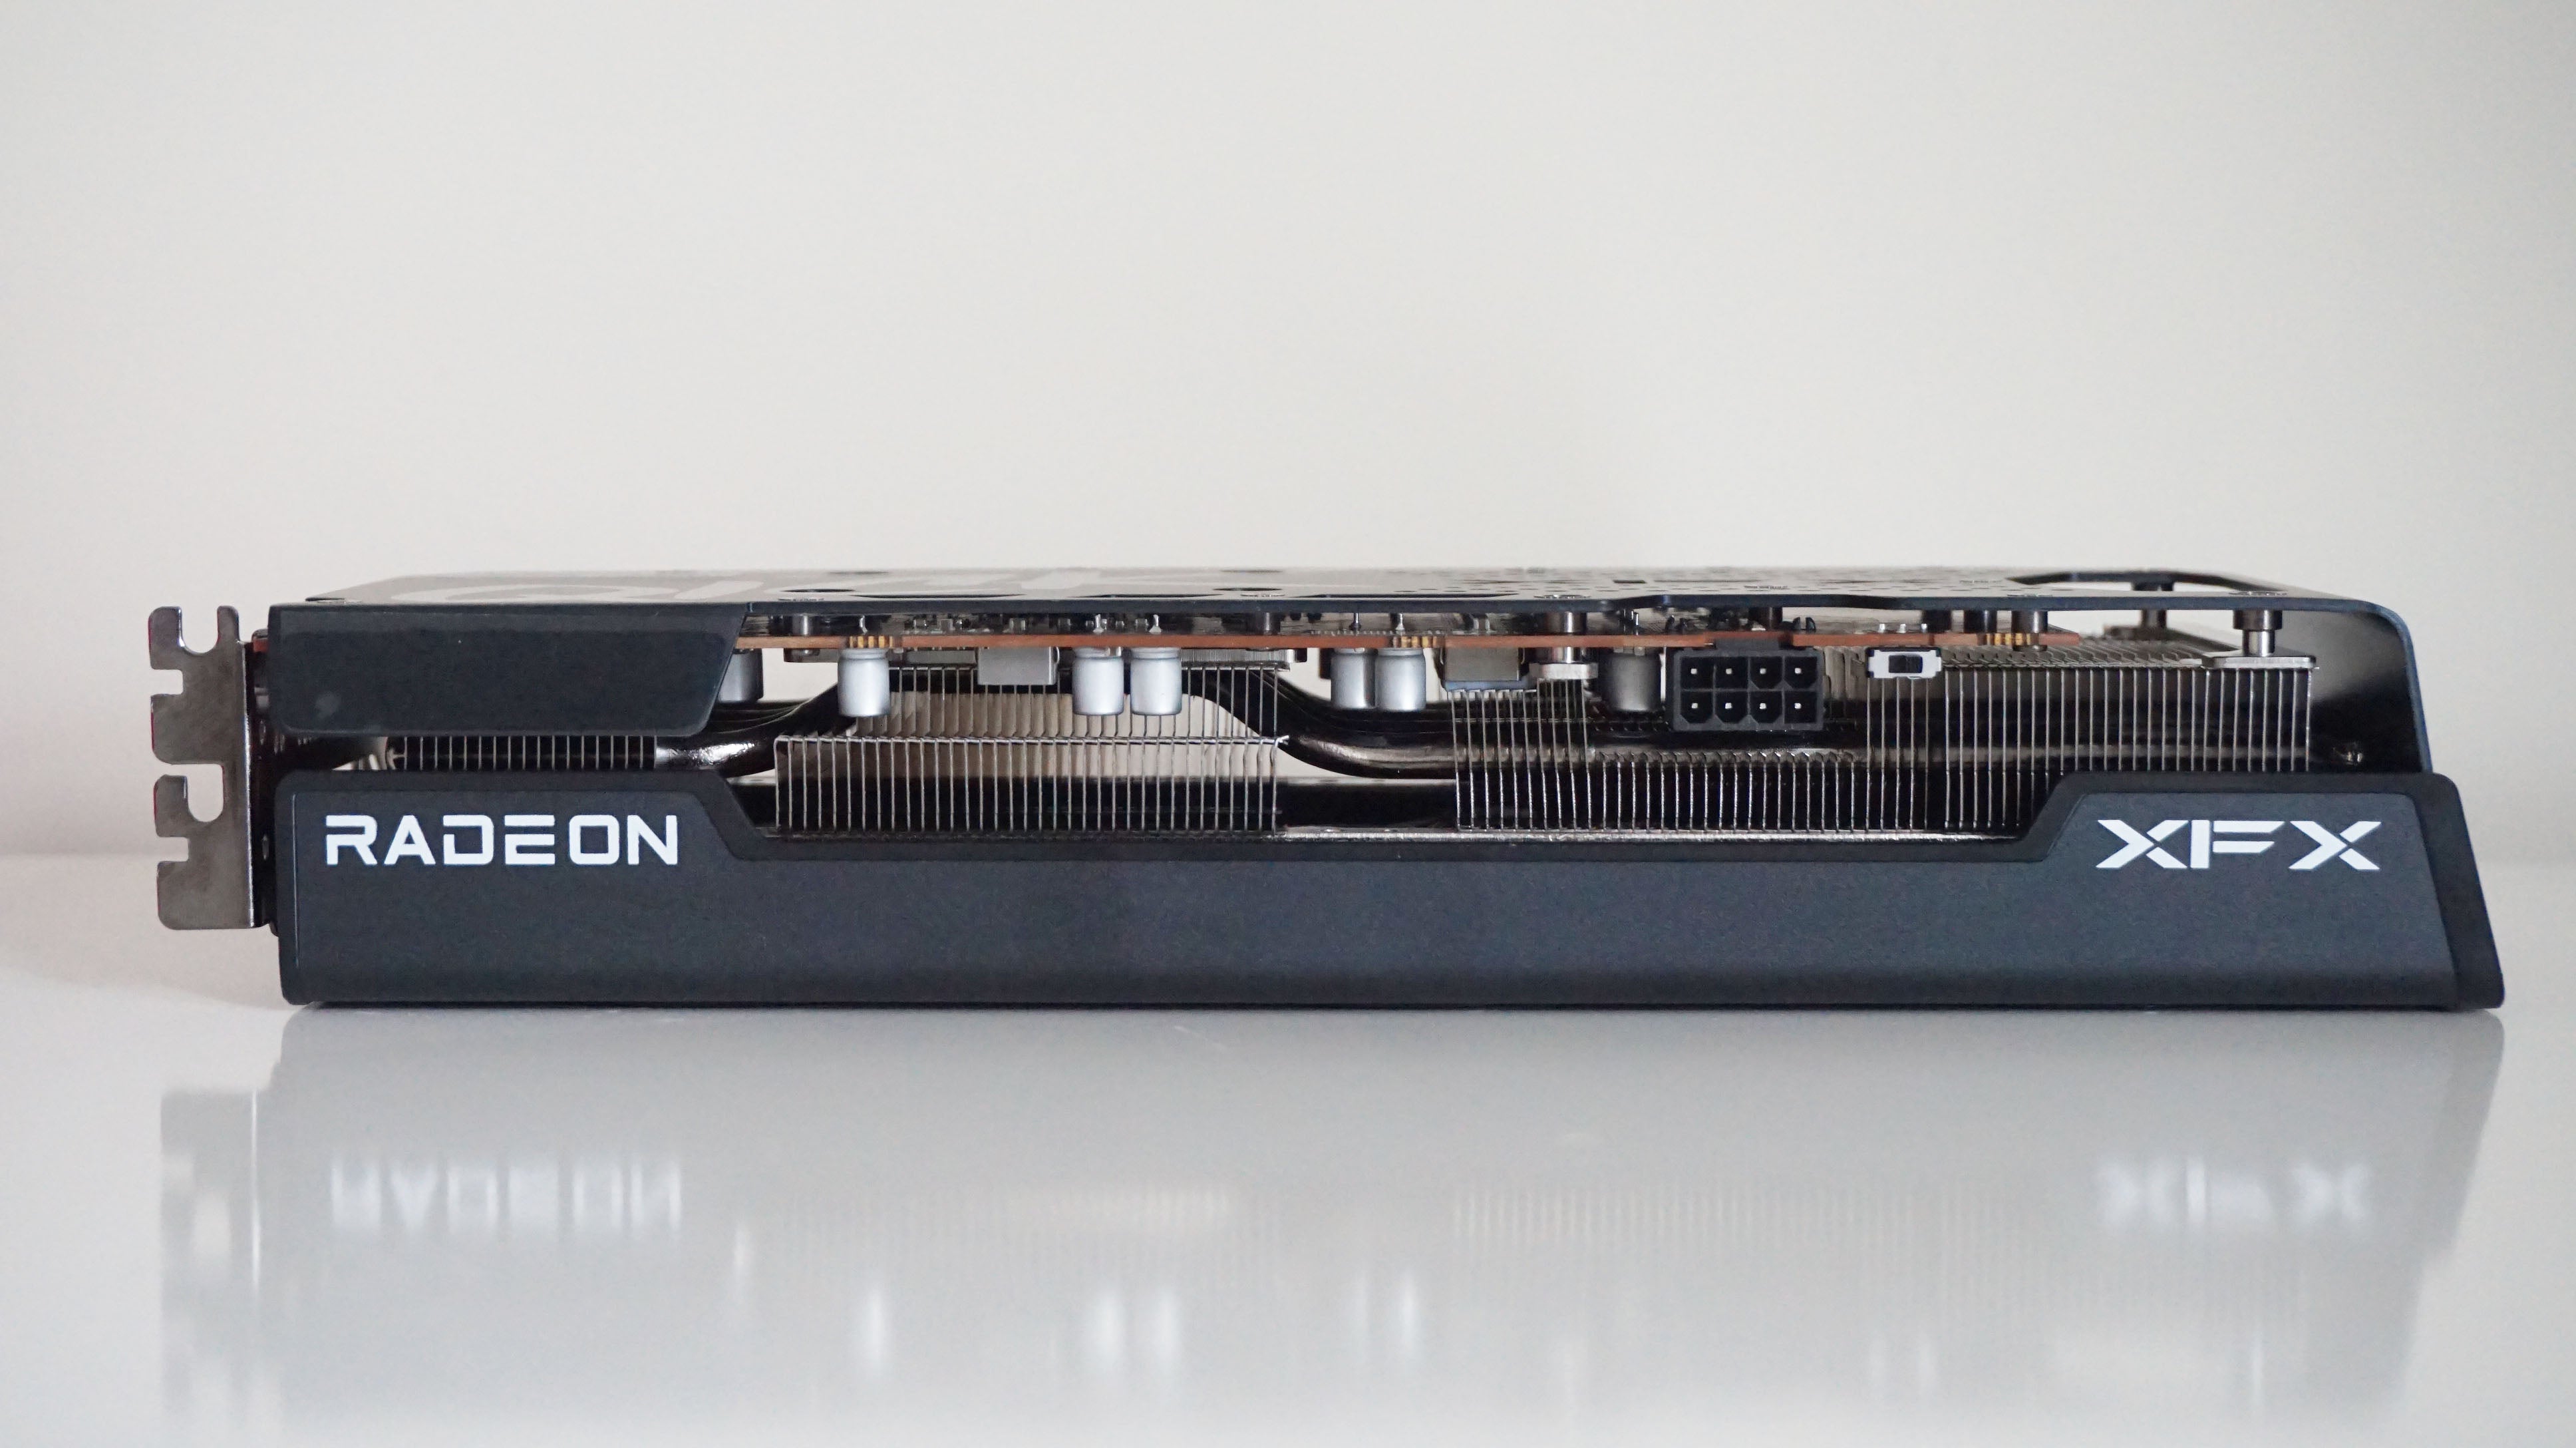 A photo of the AMD Radeon RX 6600 XT graphics card on its side, showing its single 8-pin power connector